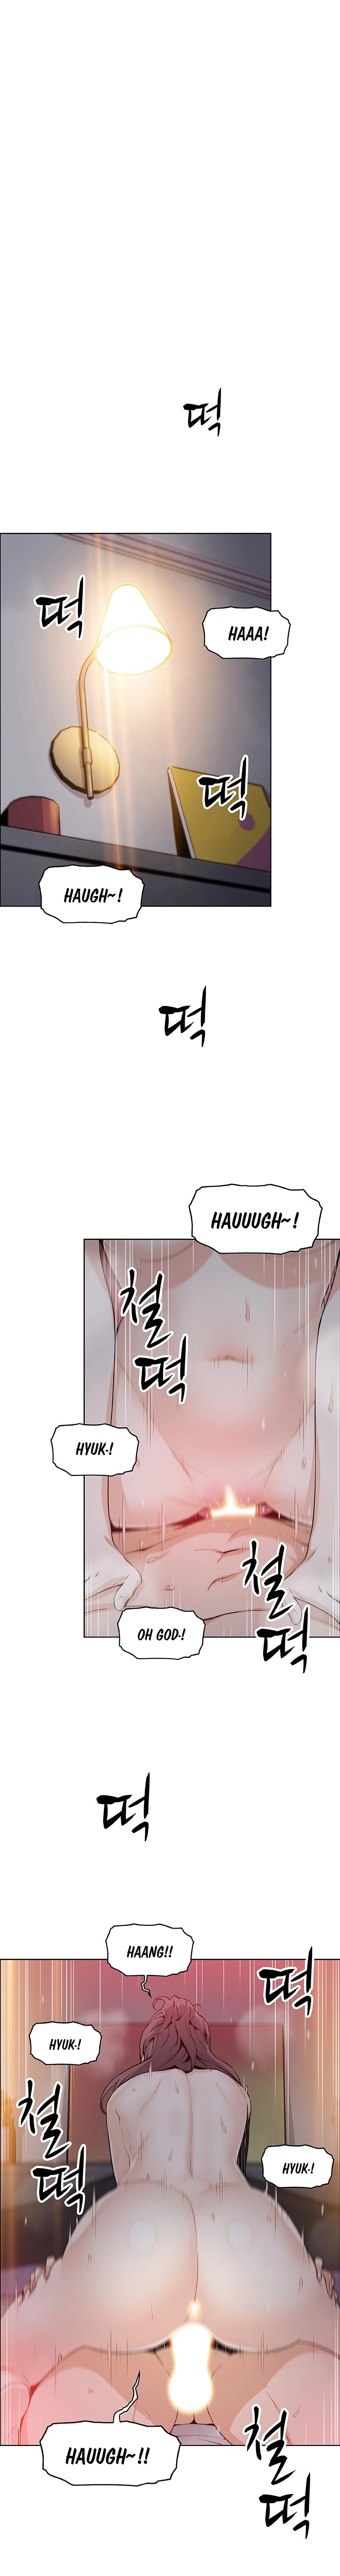 Housekeeper Manhwa - Chapter 34 Page 4